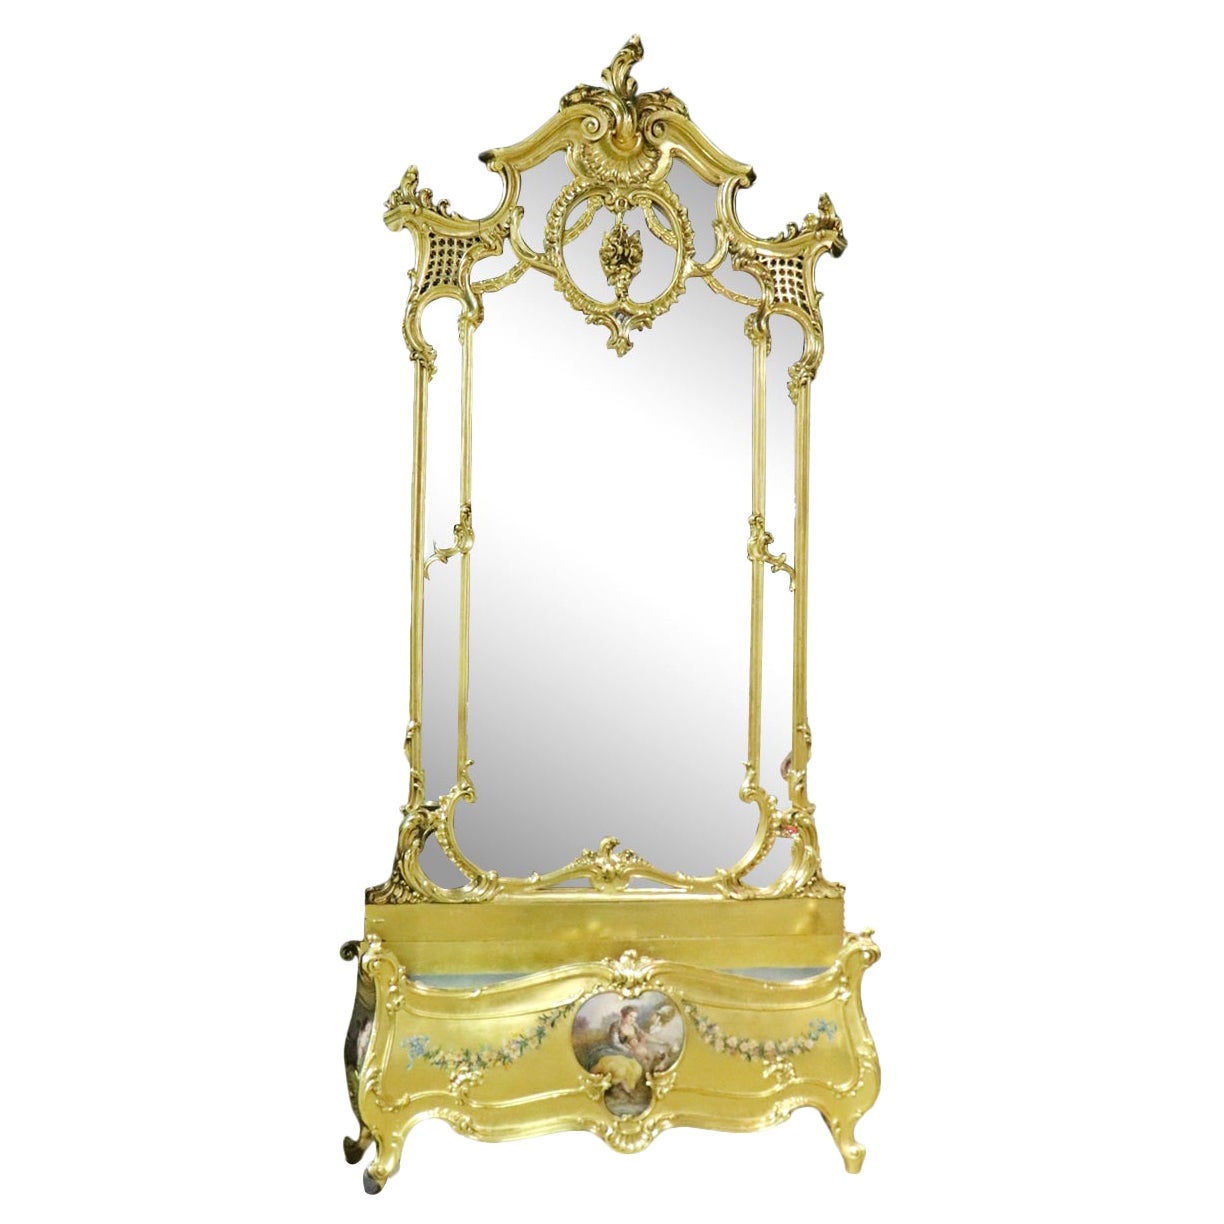 Palatial French Louis XV Gilded Tall Pier Mirror with Umbrella Holder circa 1890 For Sale